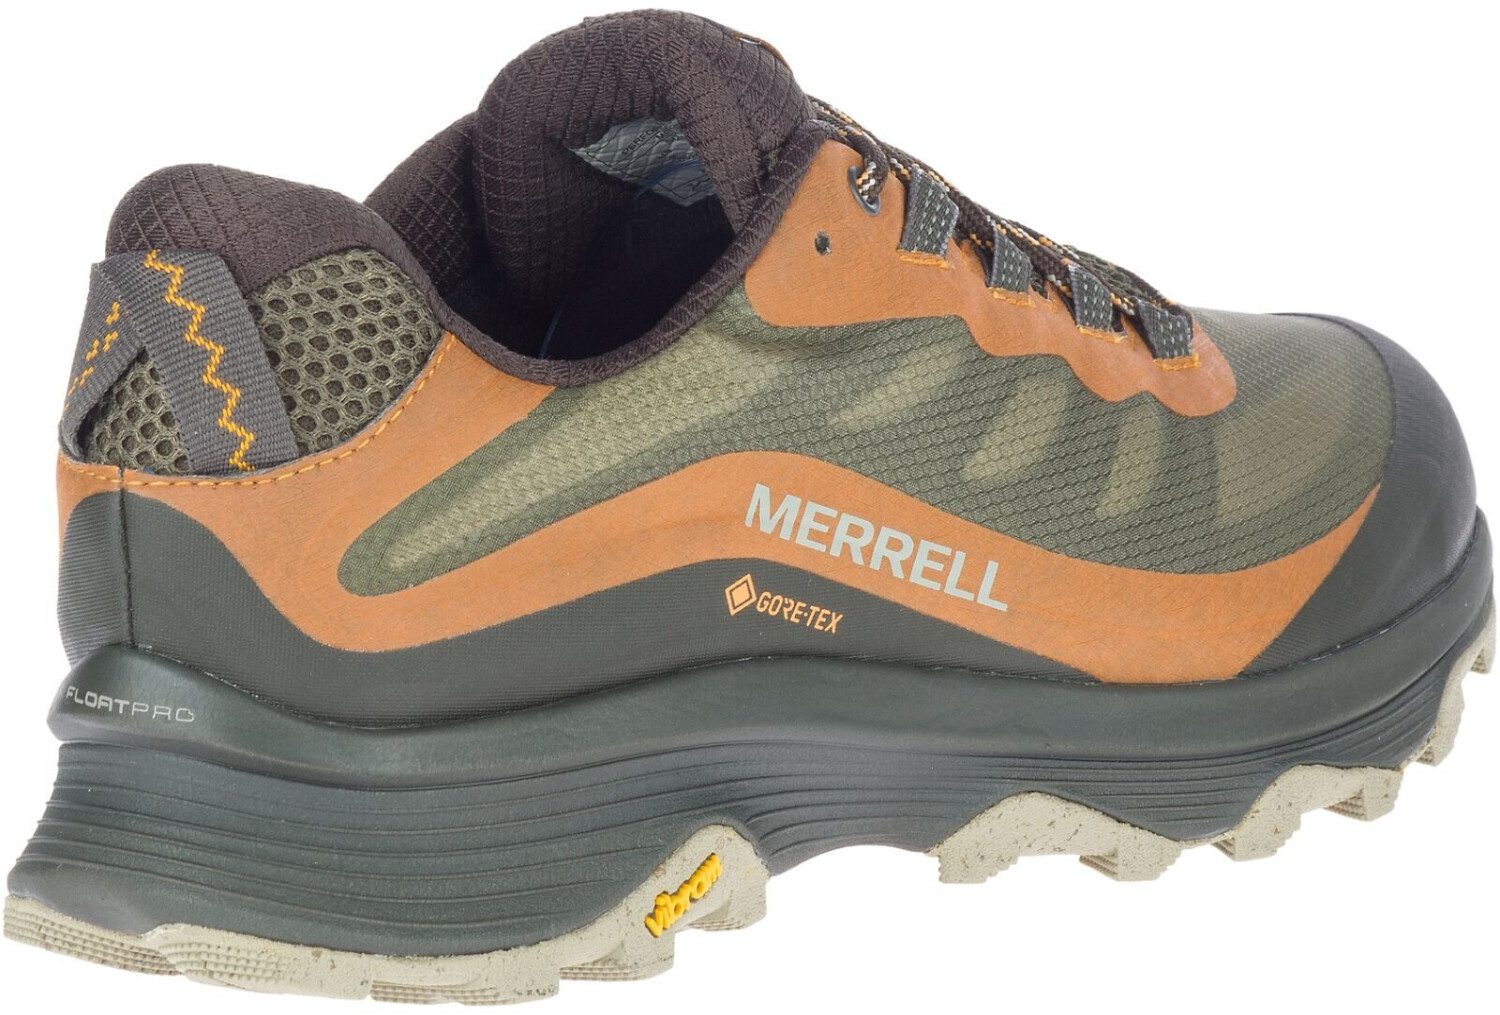 Buy Merrell Moab Speed GTX lichen from £74.95 (Today) – Best Deals on ...